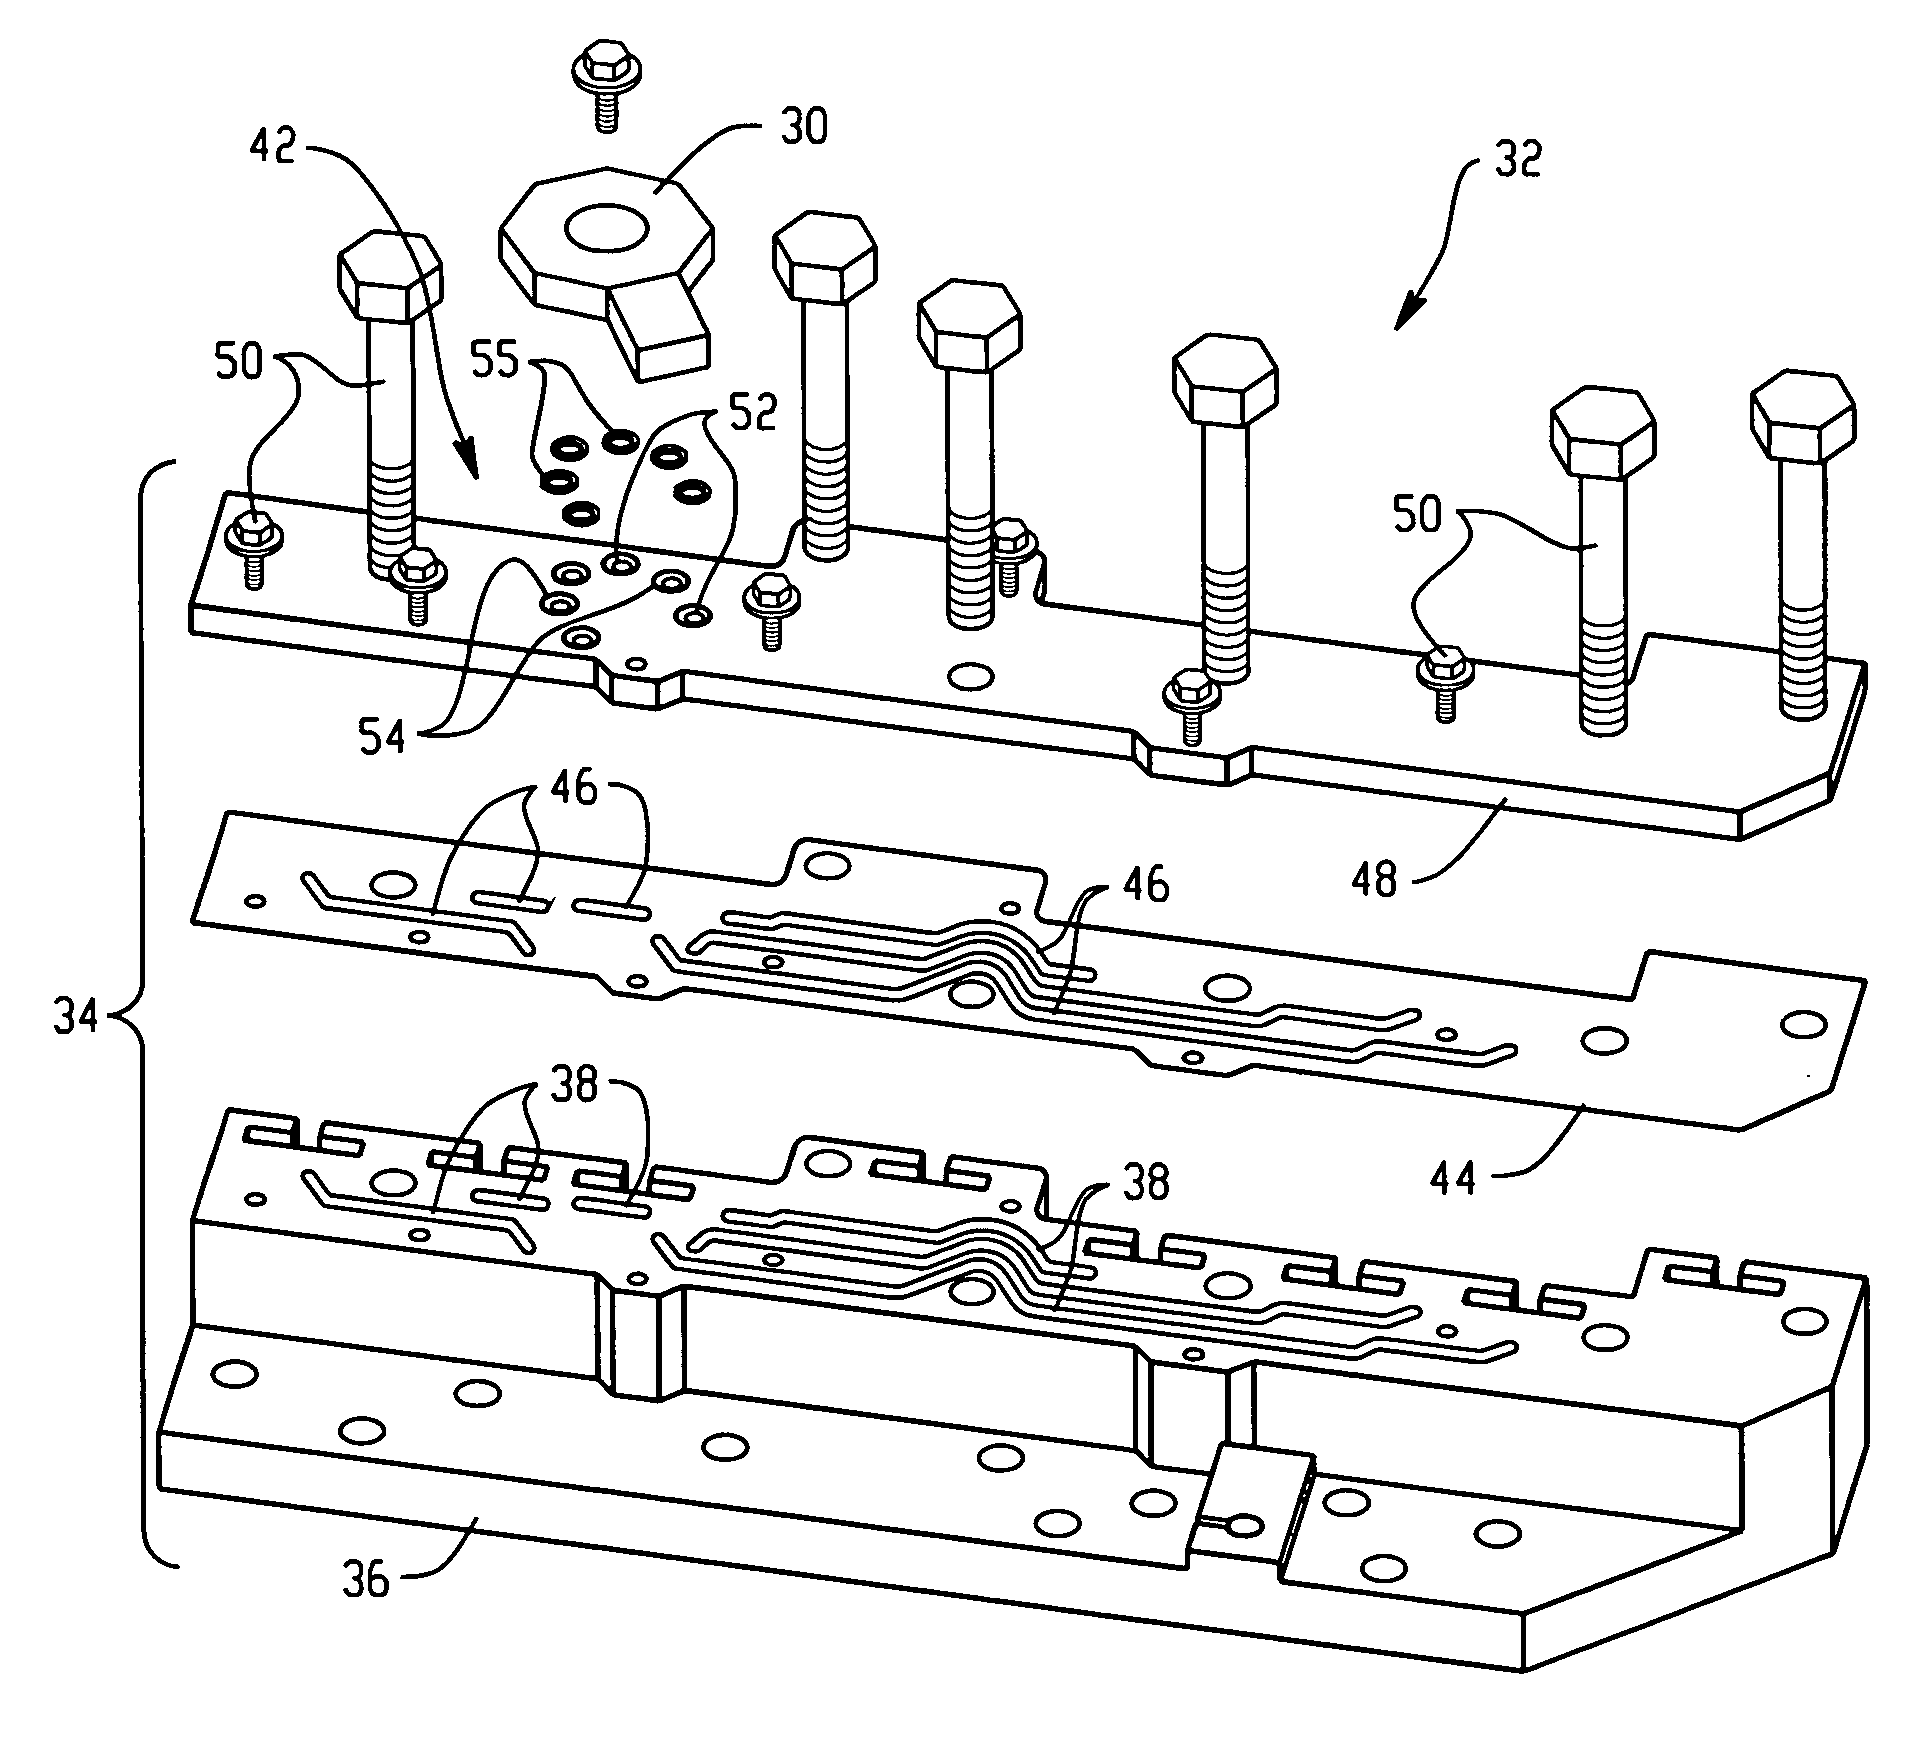 Manifold assembly having a centralized pressure sensing package